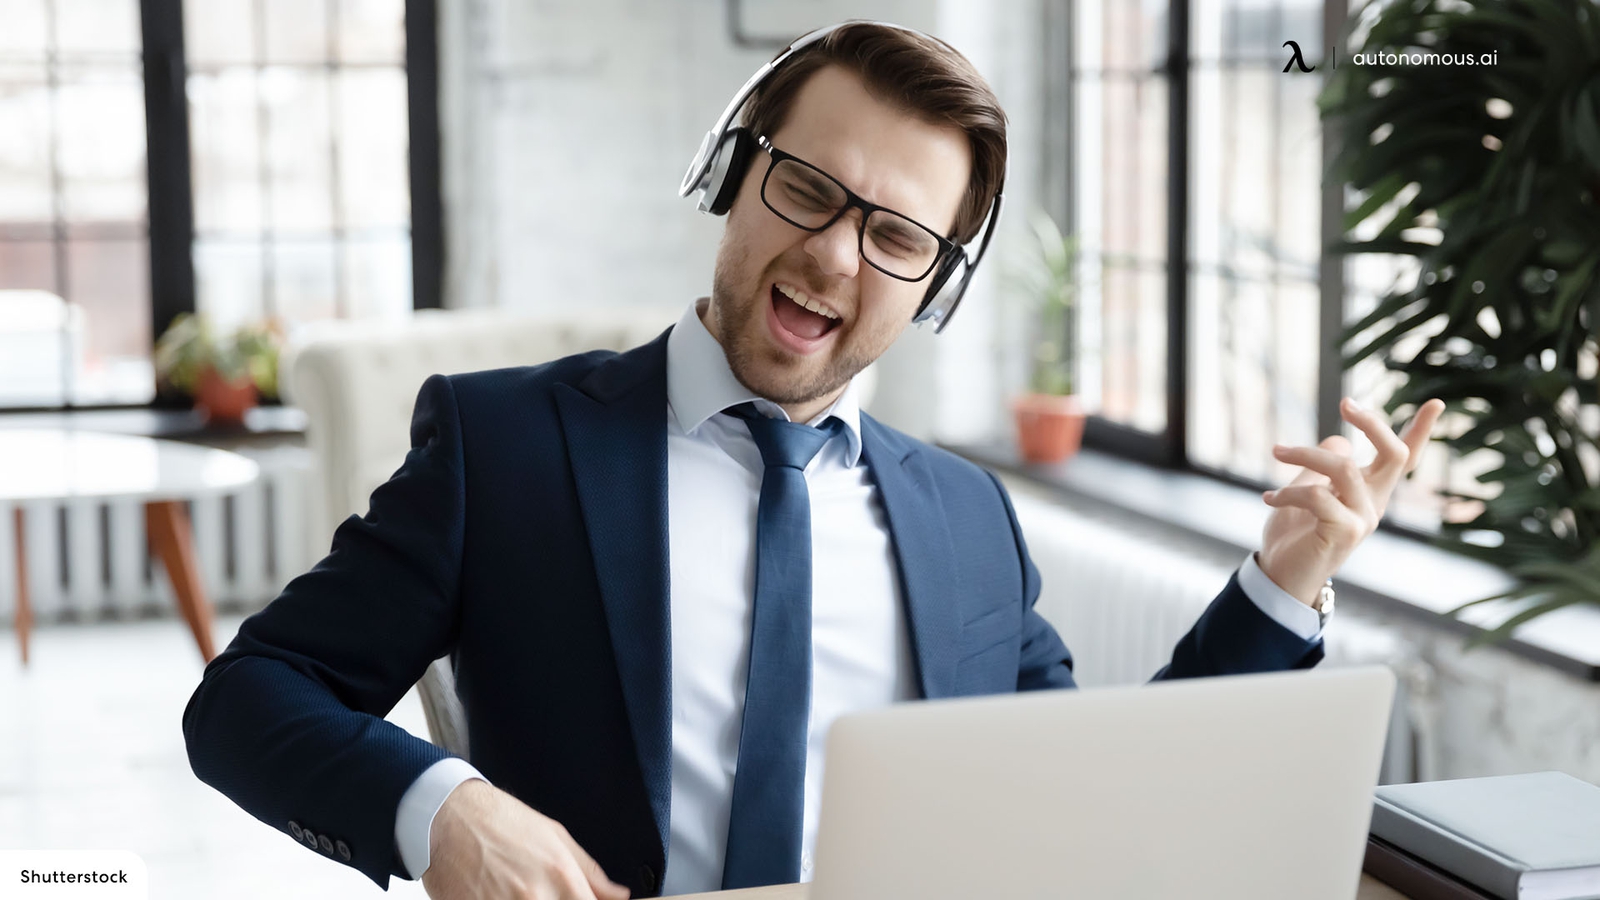 Benefits of Music in The Workplace for Work Performance